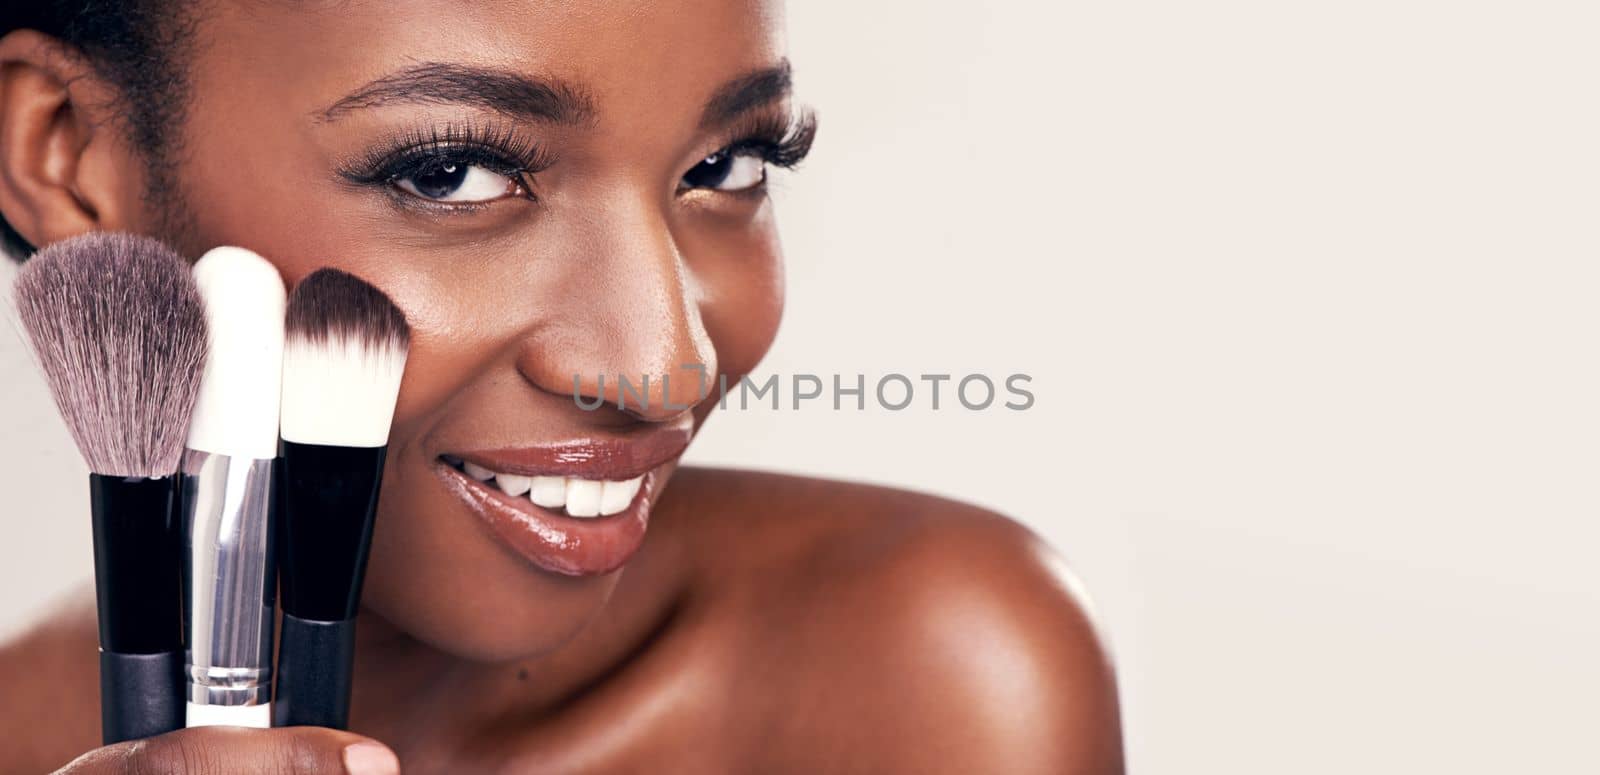 Bring your beauty to life with these. Studio shot of a beautiful young woman holding a set of makeup brushes